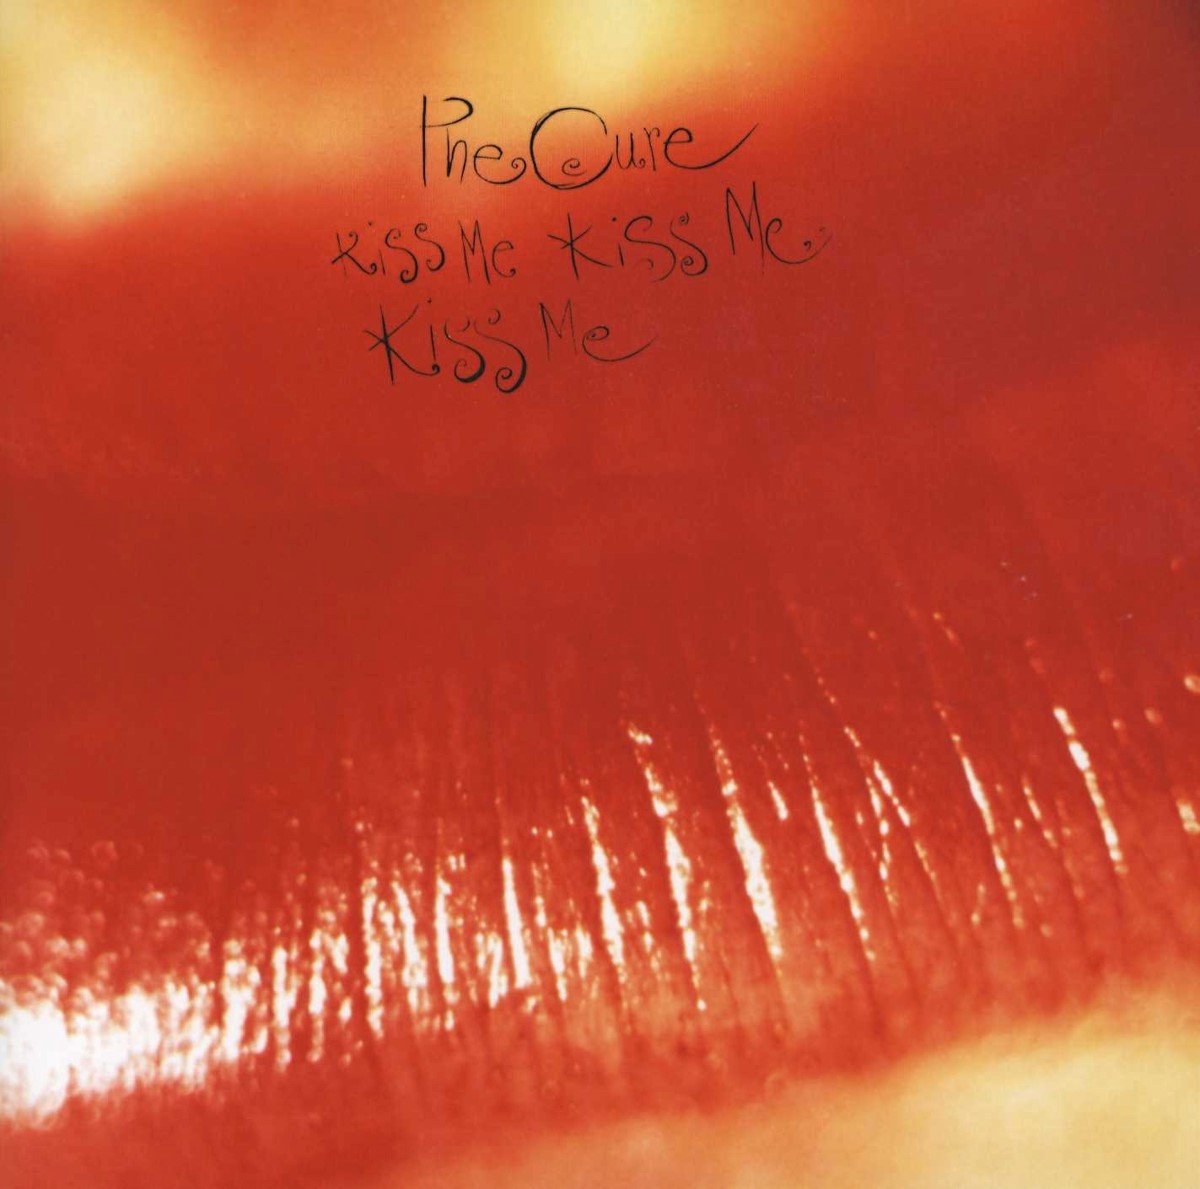 The Cure - Kiss Me, Kiss Me, Kiss Me (CD) (Remastered) - The Cure